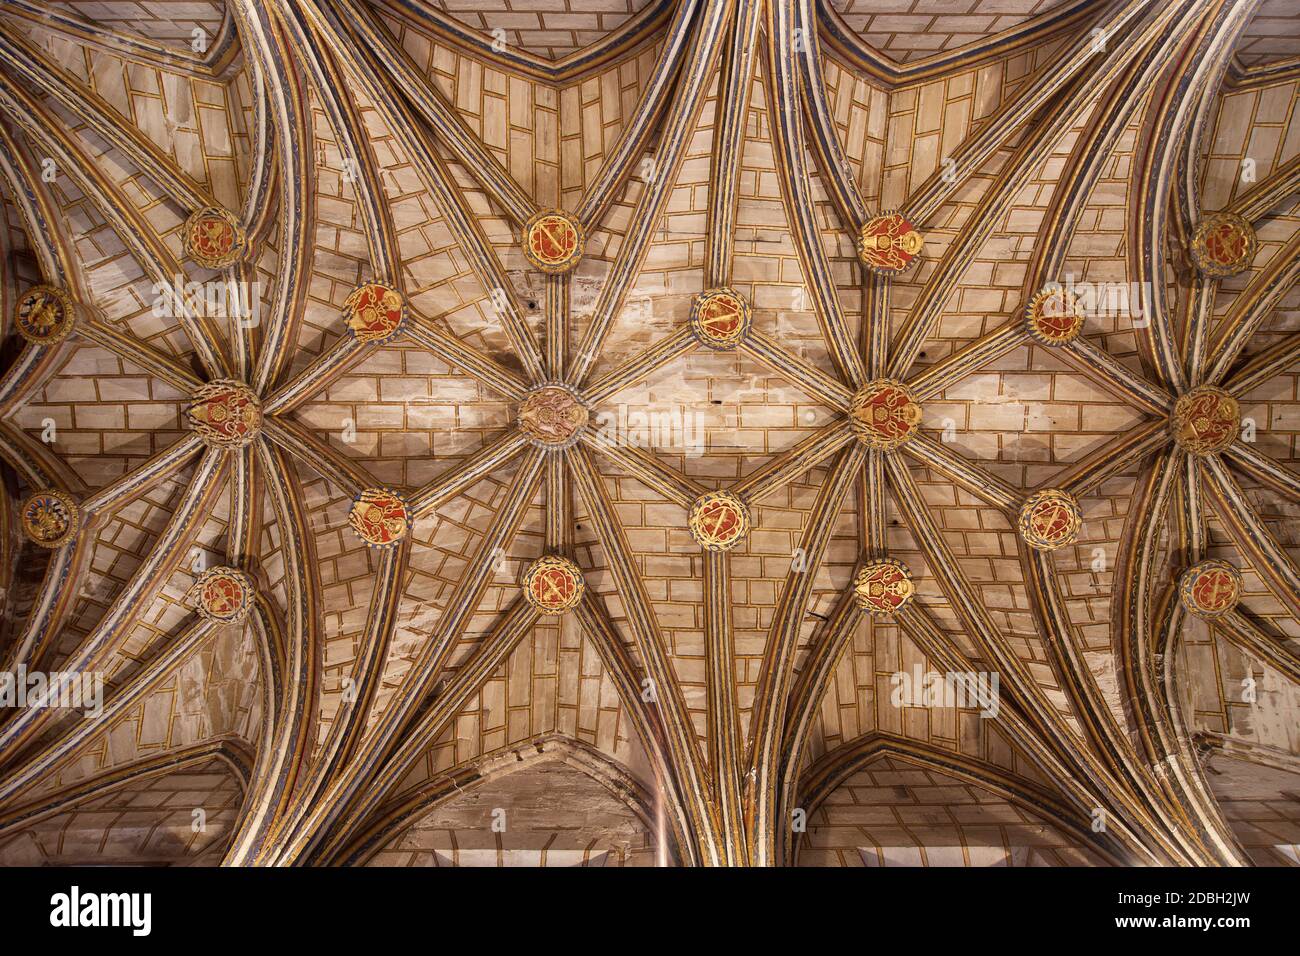 Vaulted Ceiling of the Cathedral of Santa Maria in Cuenca, Spain Stock  Photo - Alamy